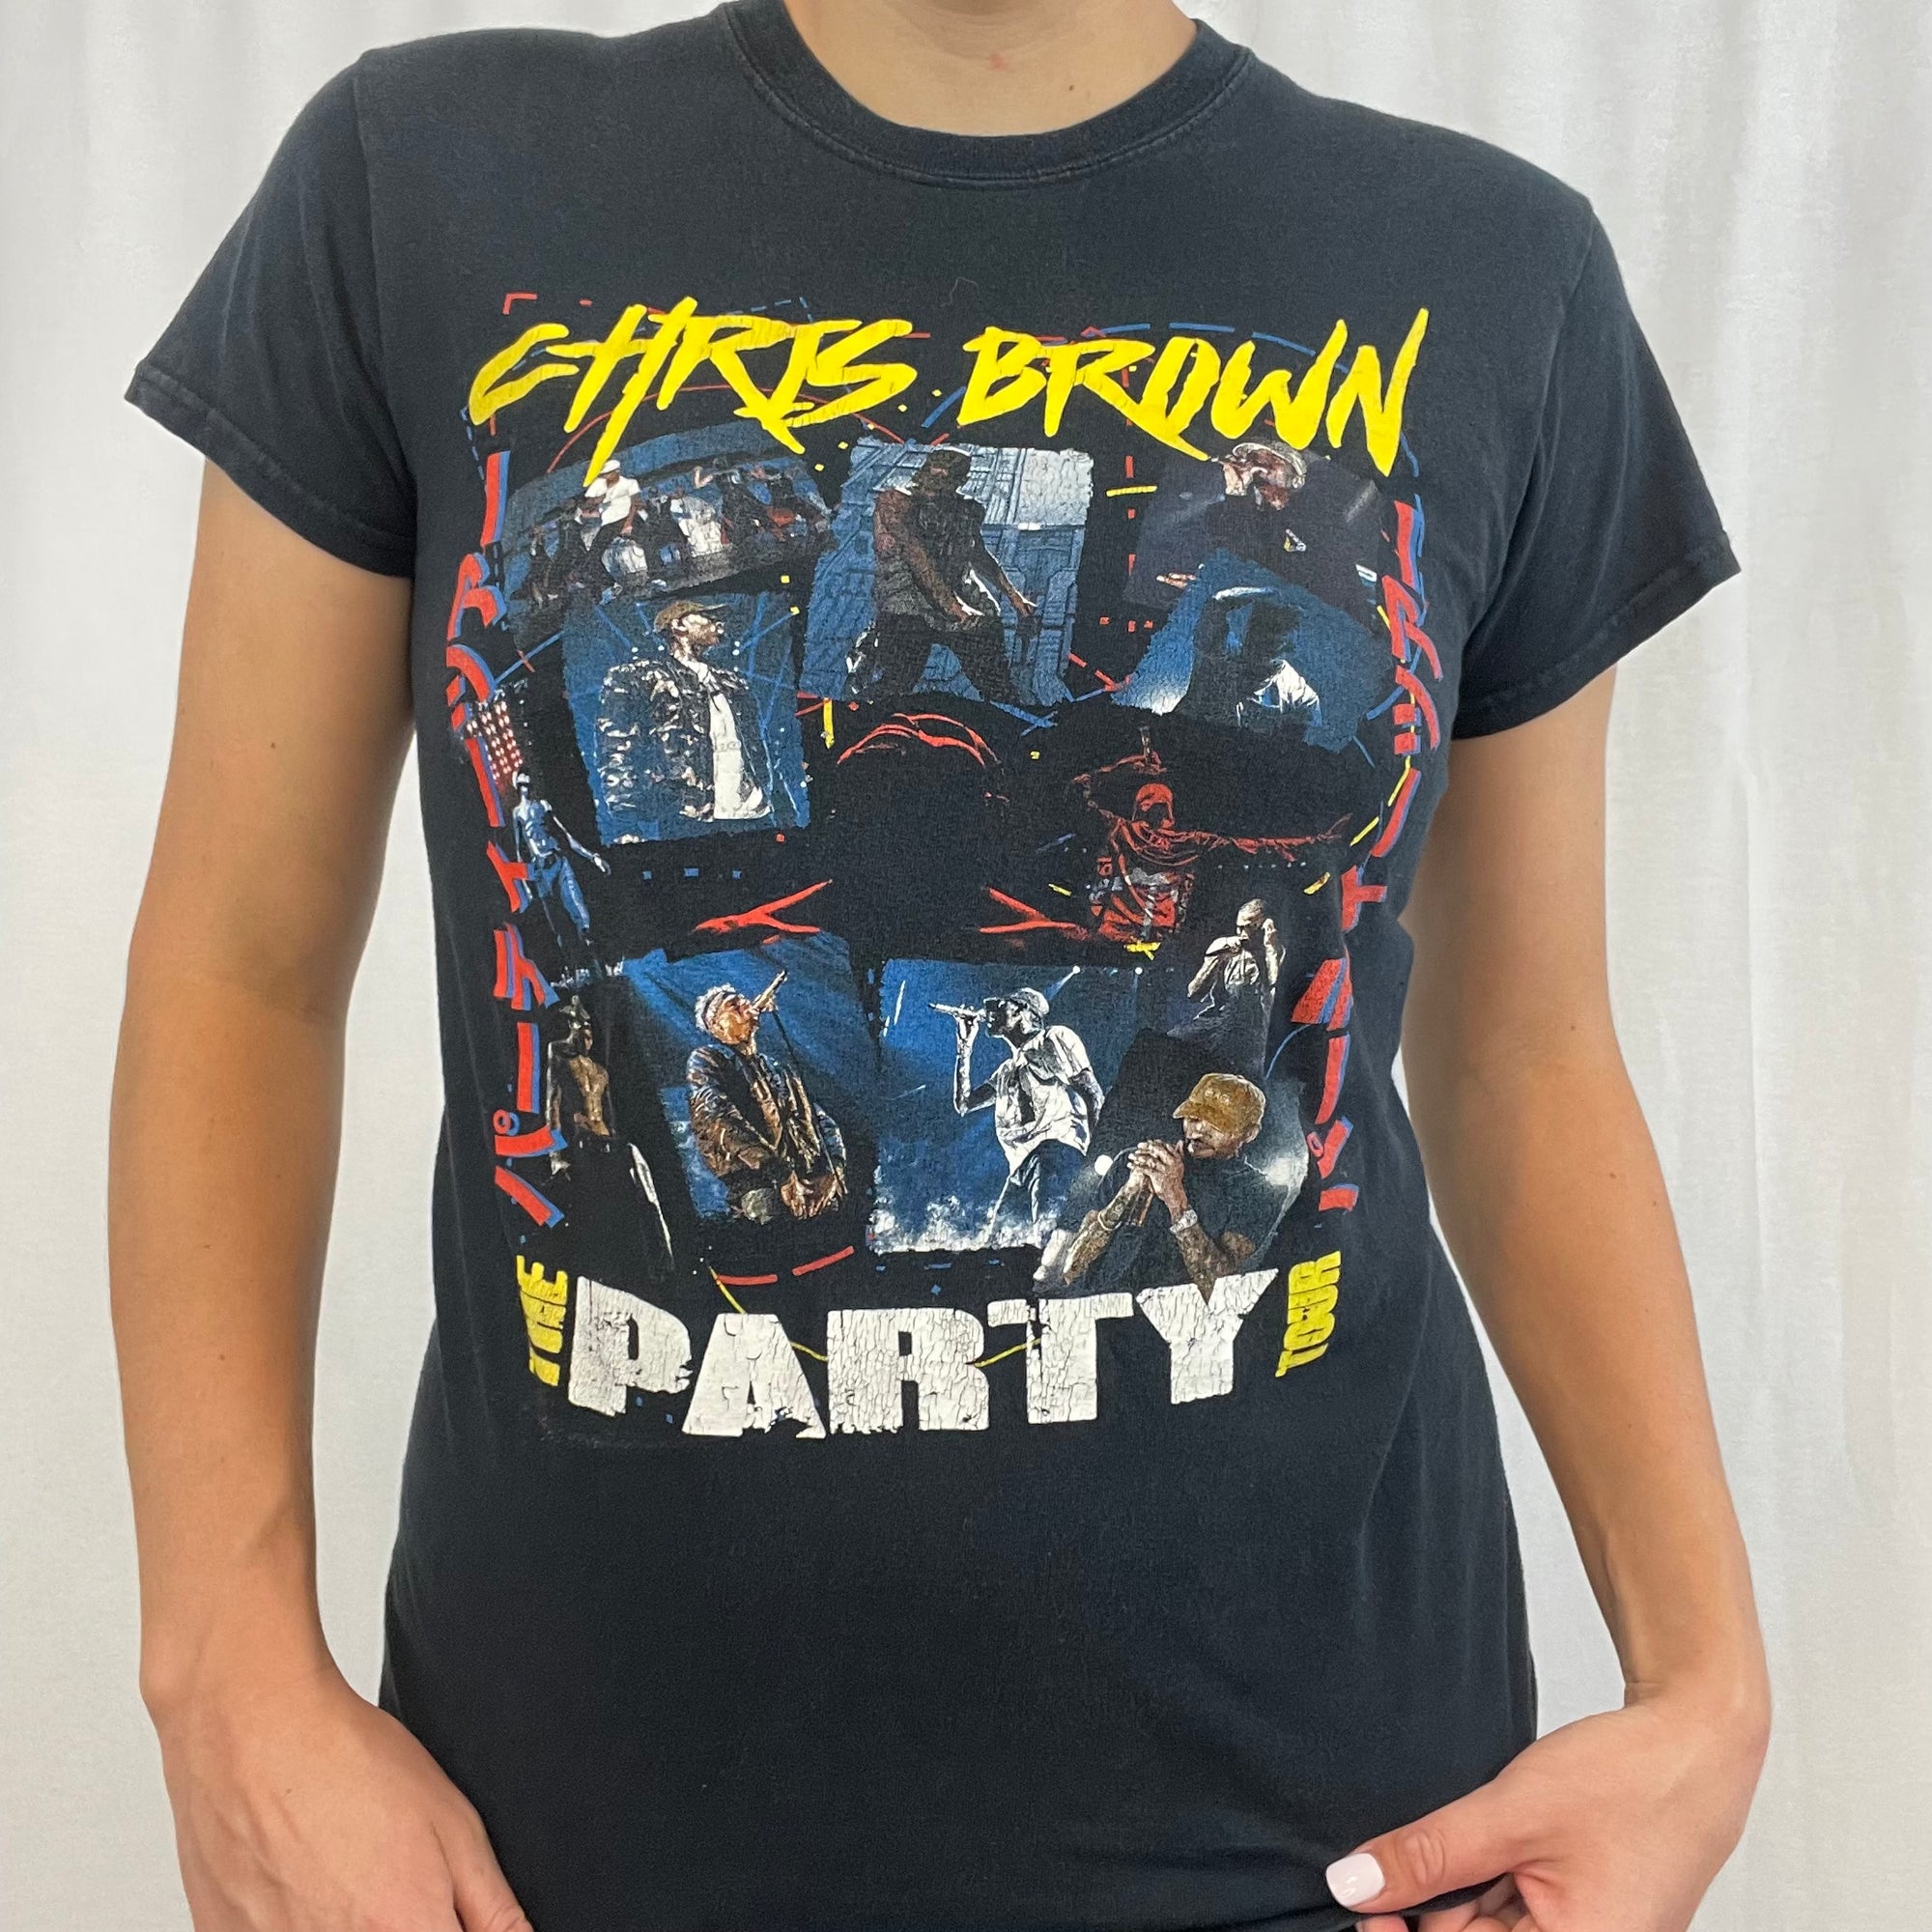 Chris Brown The Party Tour Merch Graphic Short Sleeve size Small